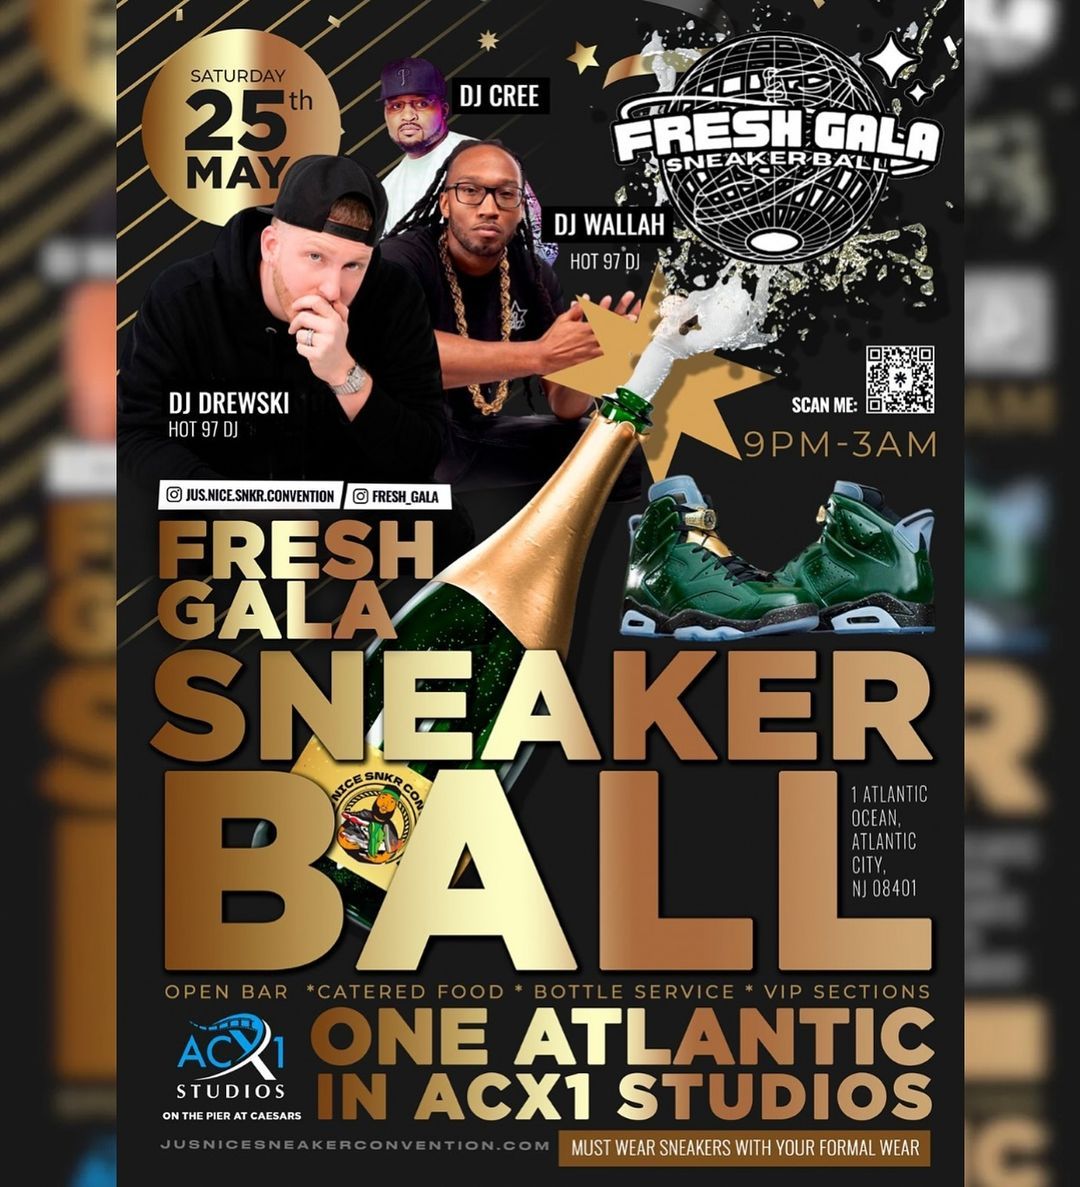 Fresh Gala presented by ACX1 Studios and Jus Nice Sneaker Convention